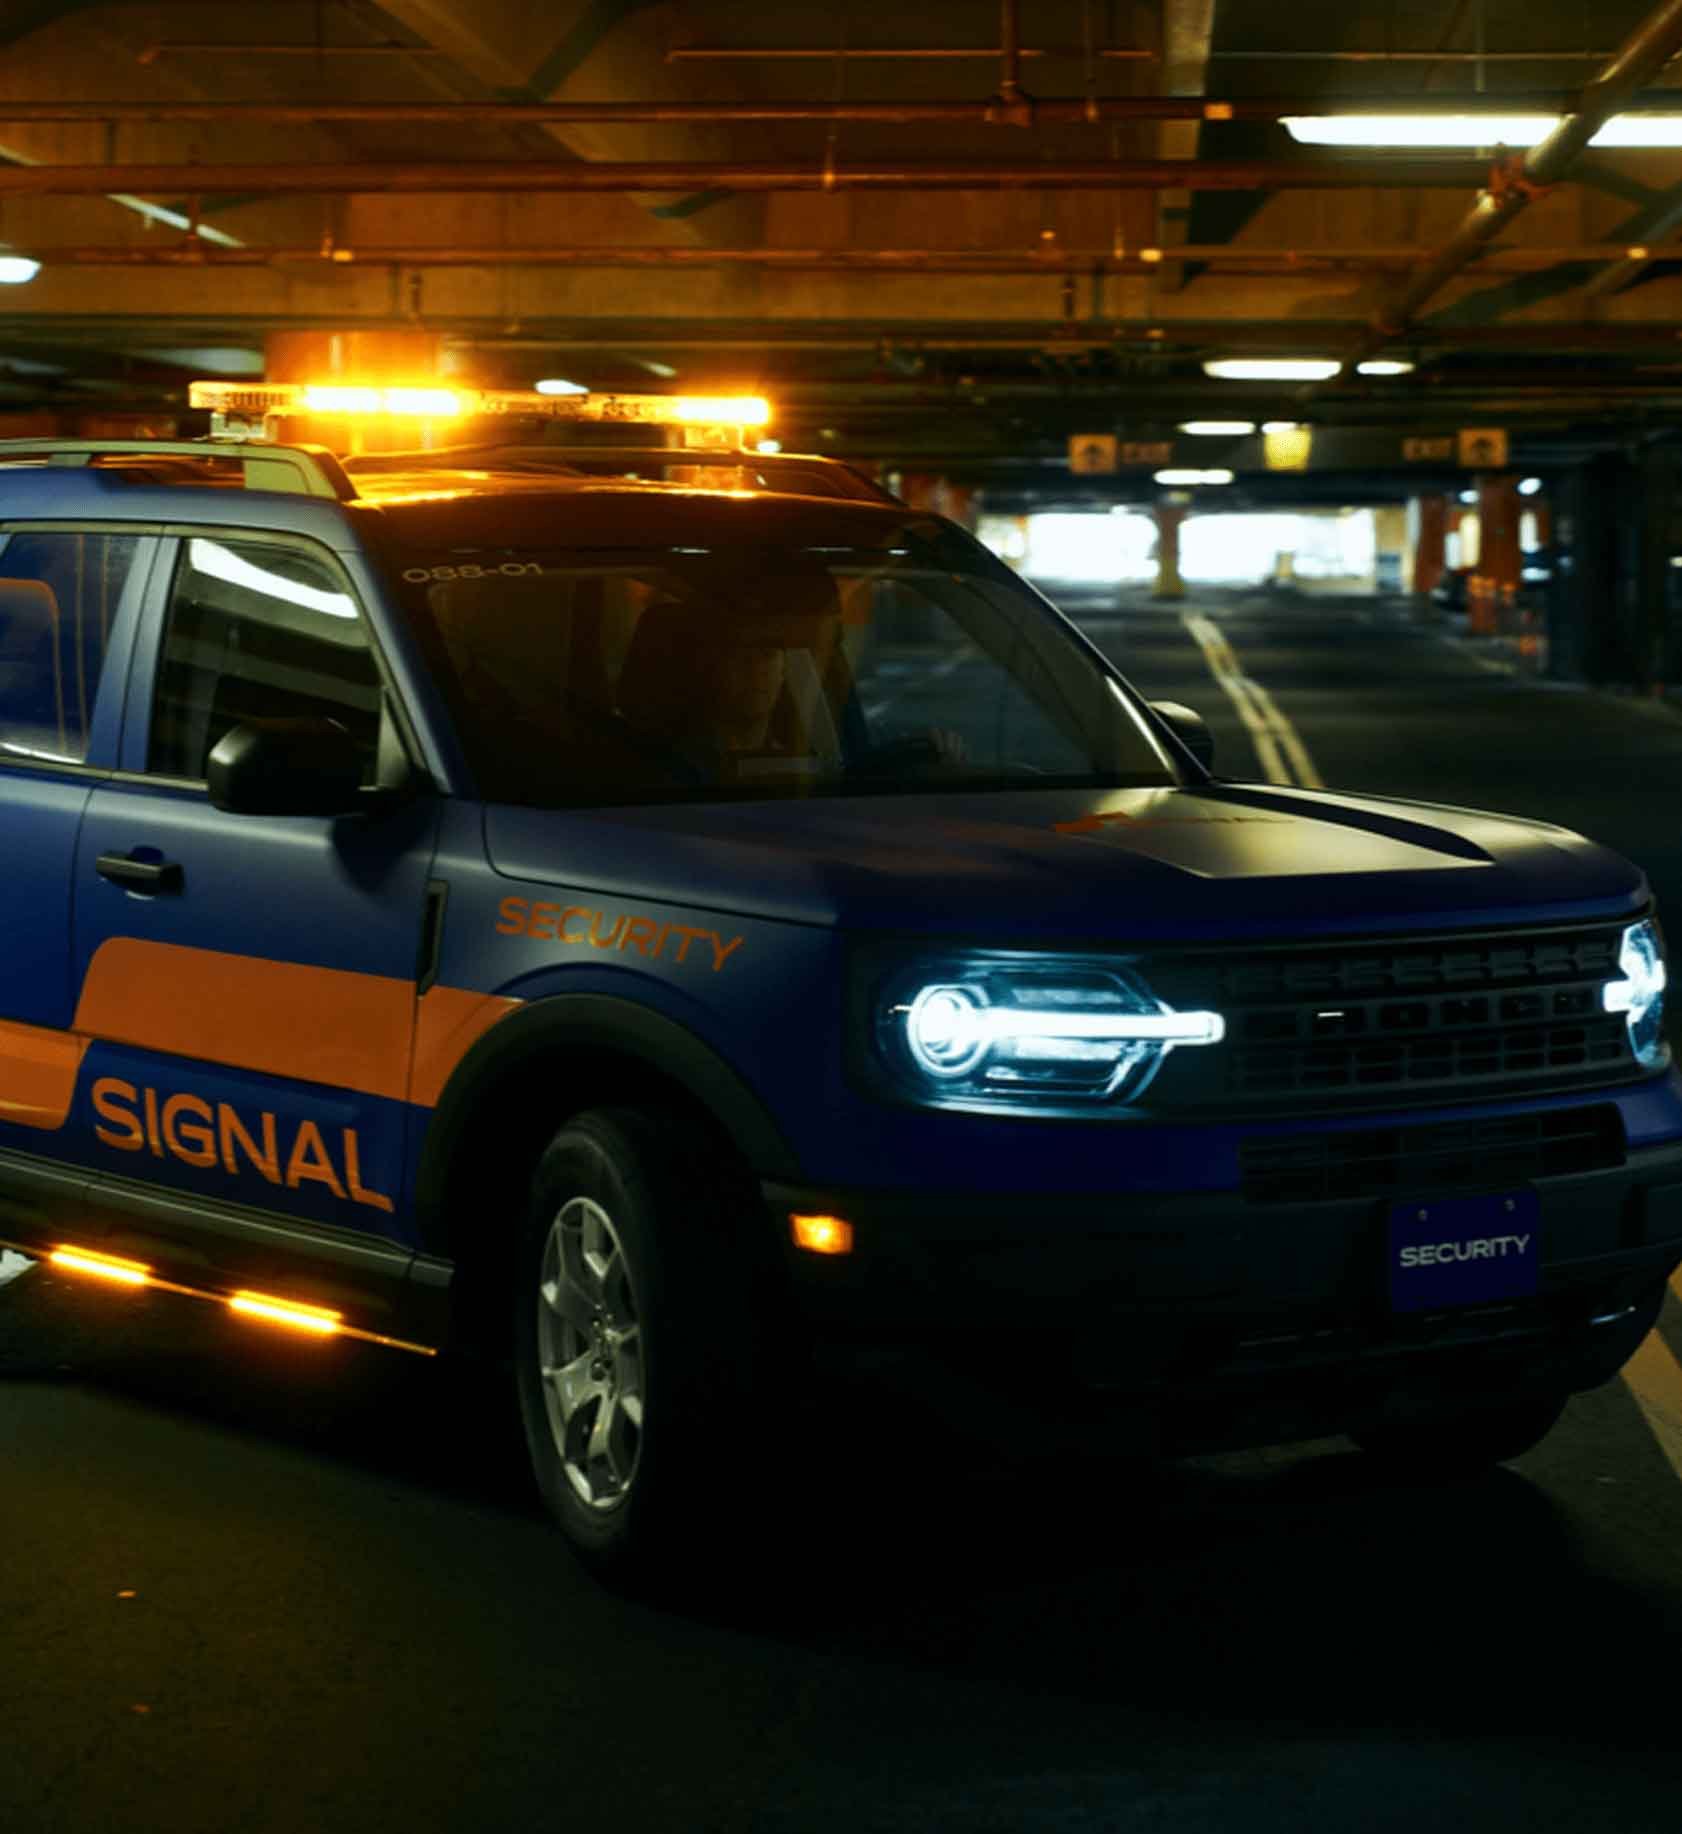 Signal company vehicle with its lights on in a dark parking garage